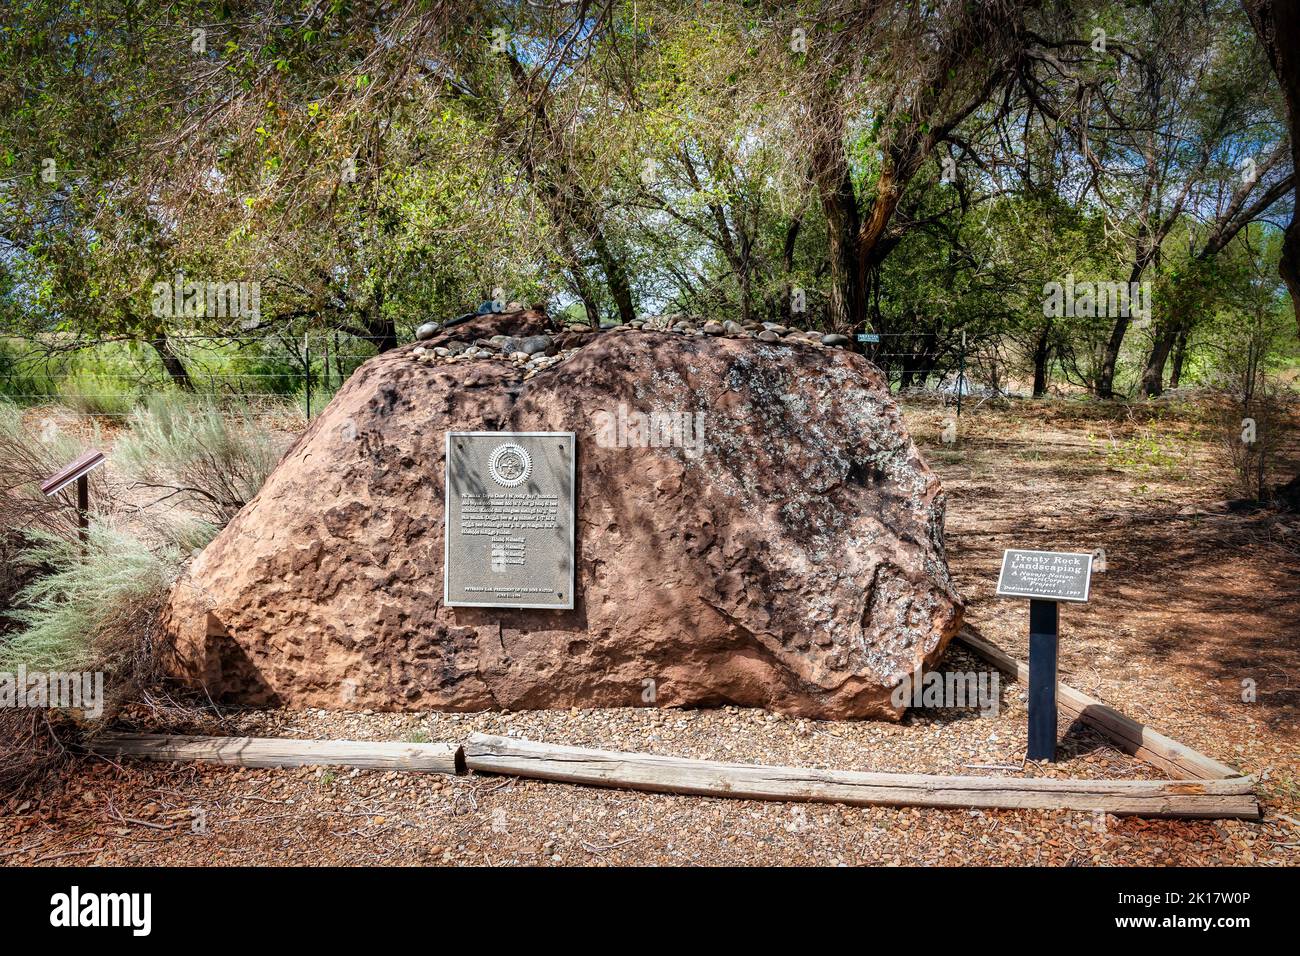 Treaty Rock at Fort Sumner, NM marks where many Navajo prisoners surrendered in 1863, symbolizing the weight cast upon their culture at this place of Stock Photo